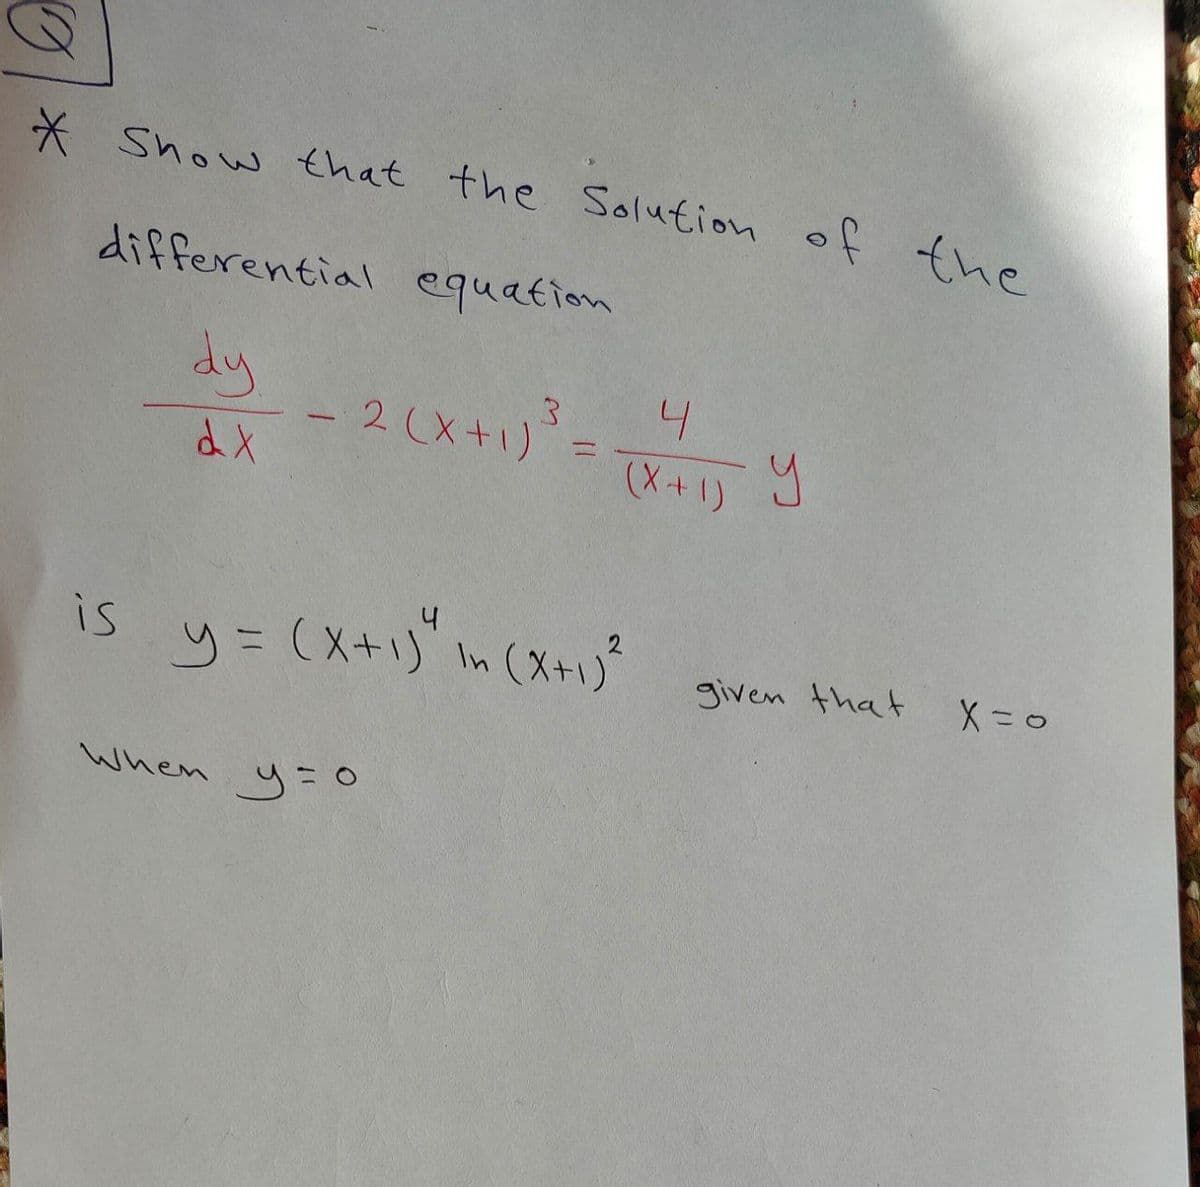 * Show that the Solution of the
differential equation
dy
- 2 (x+1)-
4
%3D
(X+1)
4.
is
y= (X+1)' In (X+1
given that
When y=0
